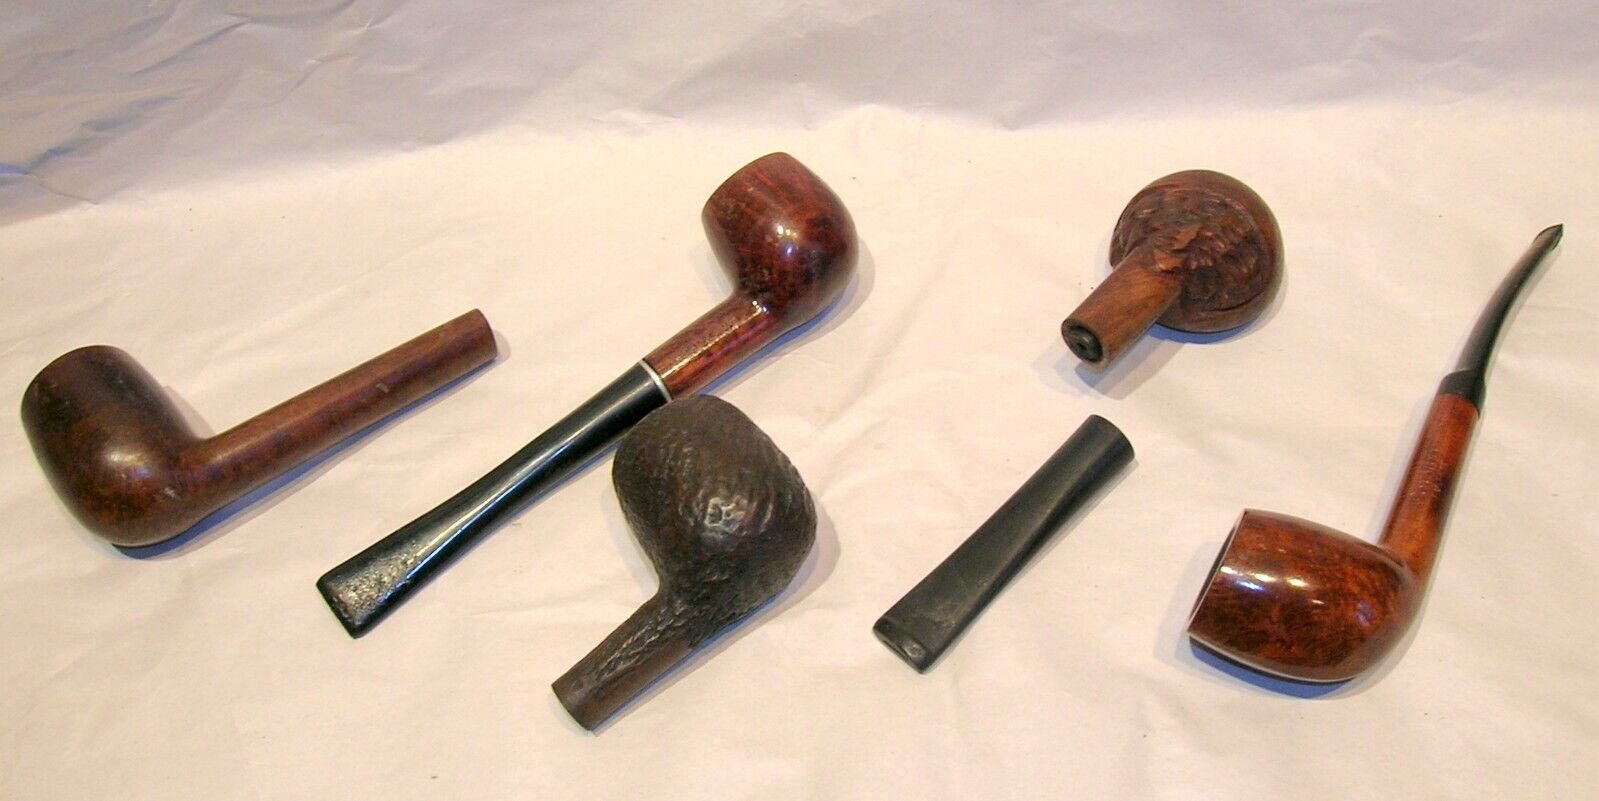 LOT OF VINTAGE TOBACCO PIPES AND PARTS - AS IS - BEST OFFER